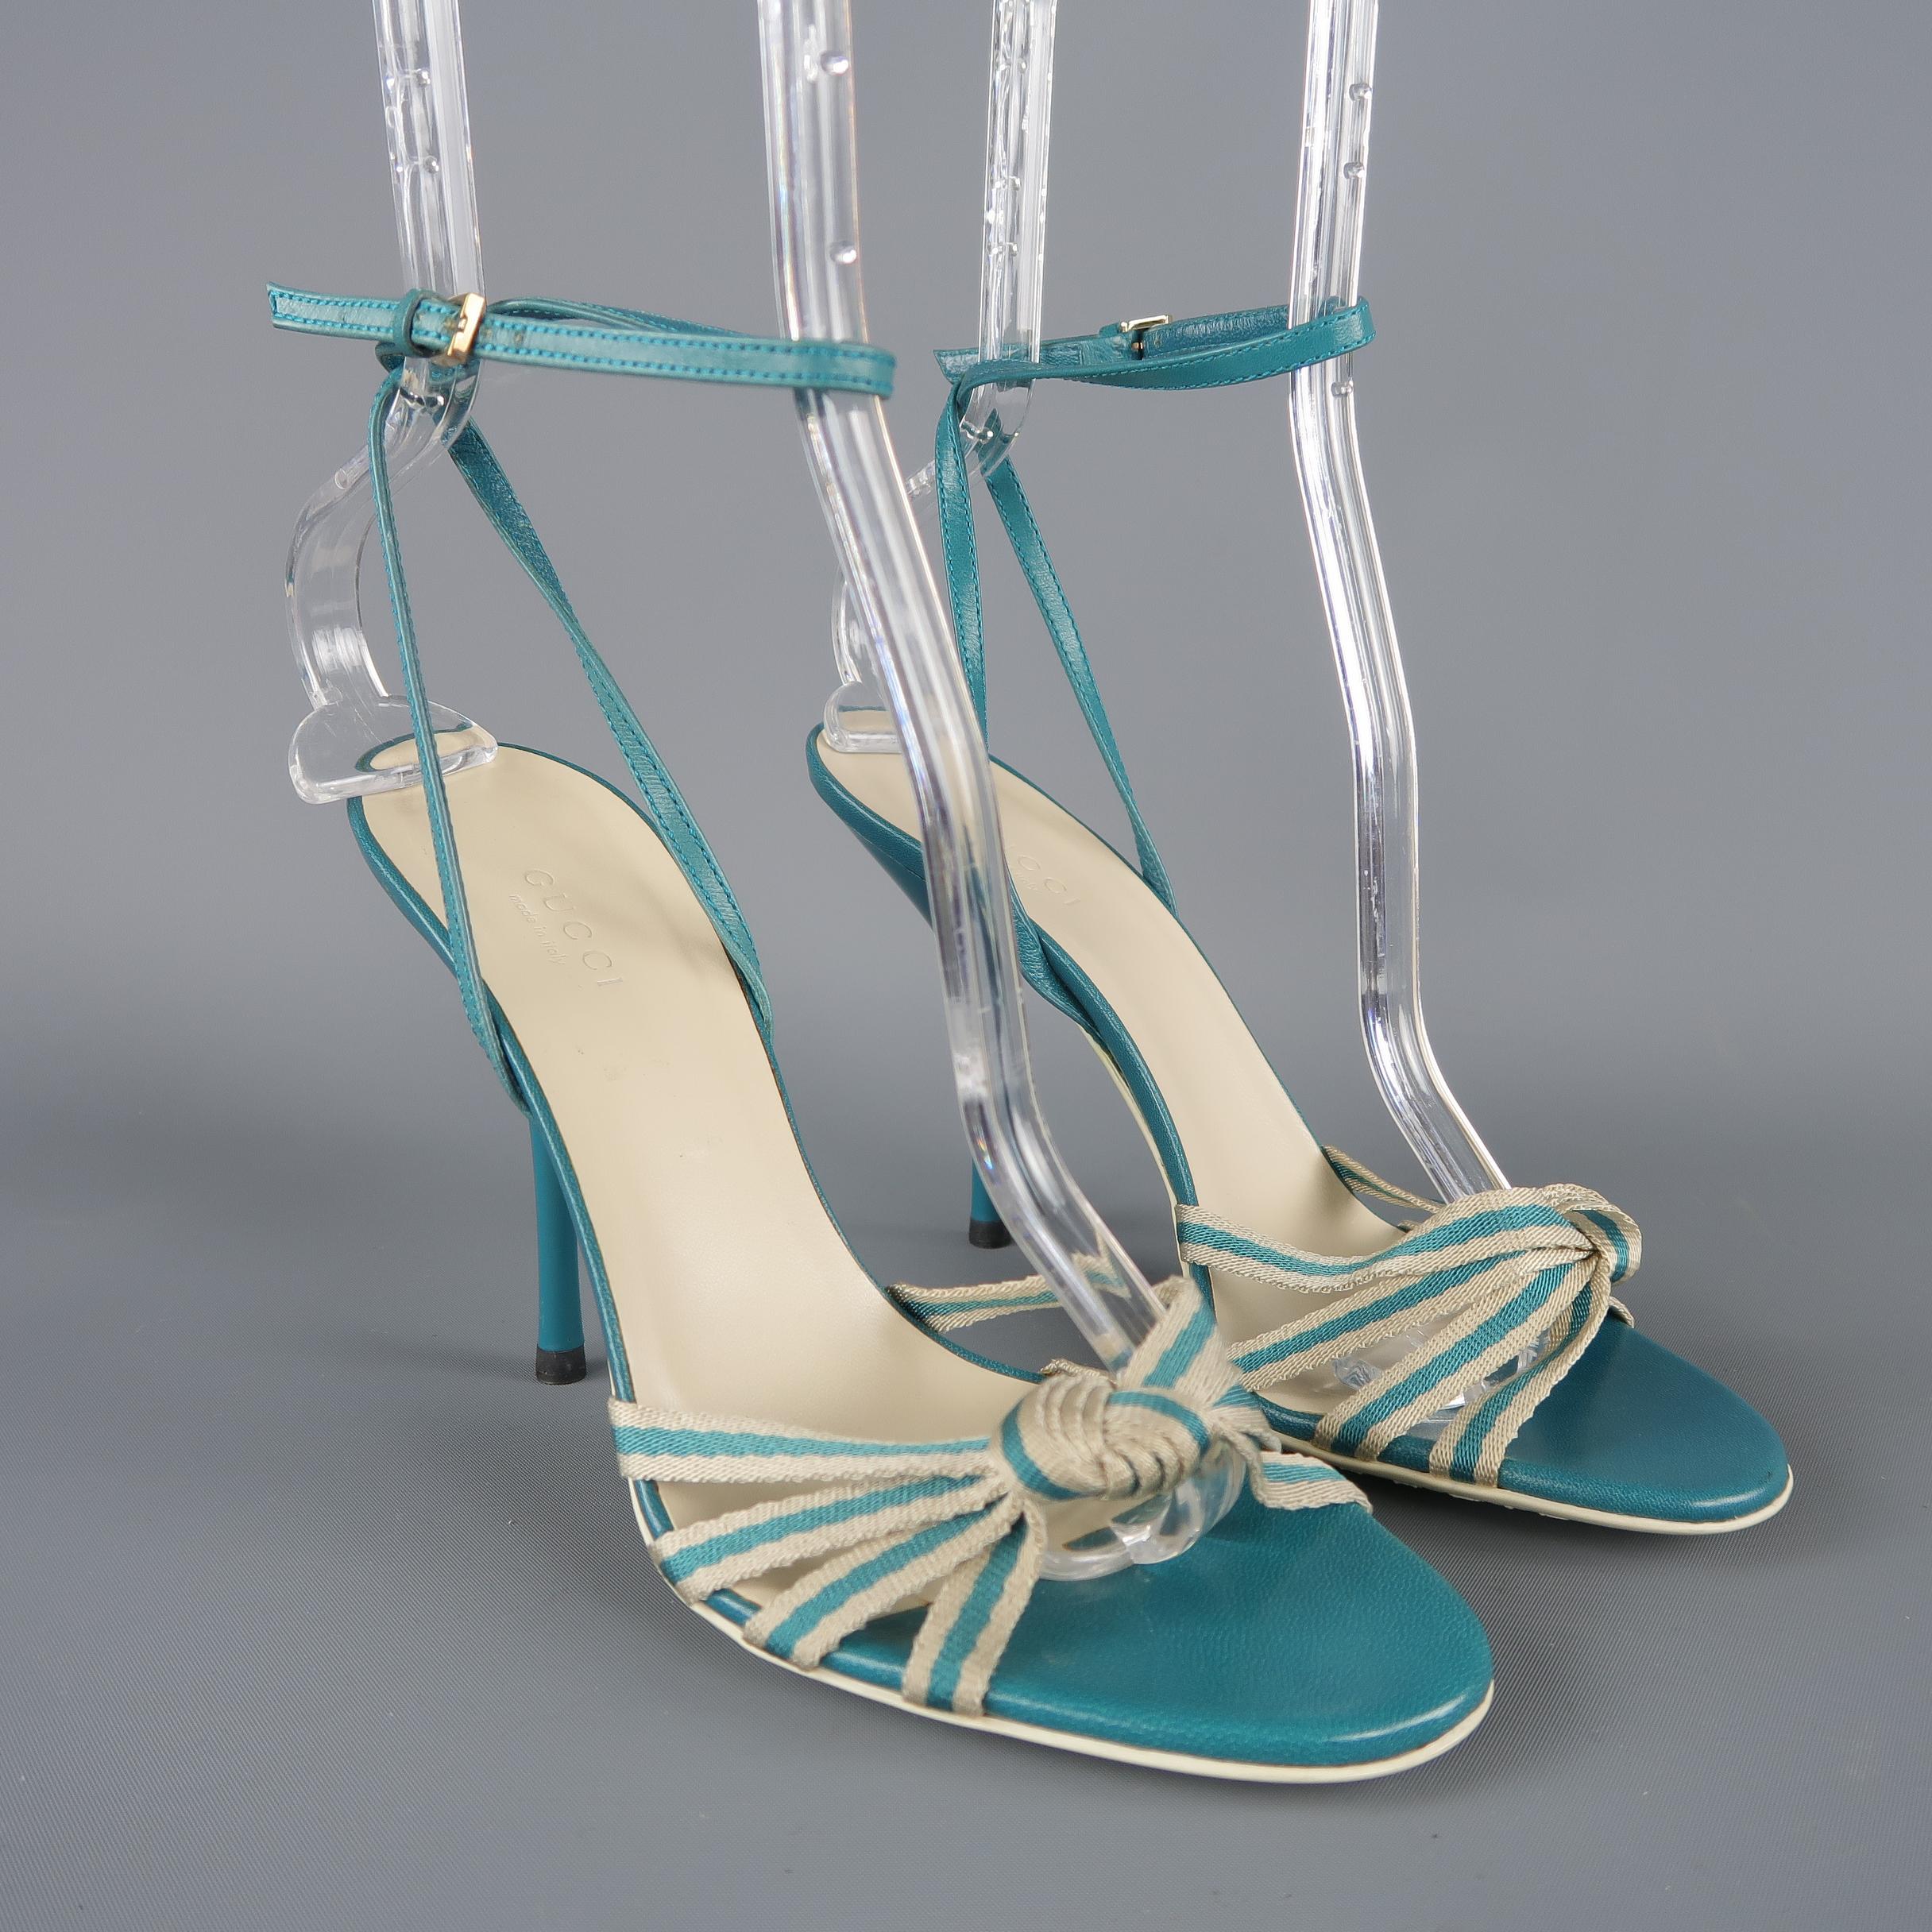 GUCCI sandals come in teal leather with a lacquered  stiletto heel, beige striped knotted silk ribbon toe strap, and wrapped ankle strap. Only tried on. With Box. Made in Italy.
 
New with Box.
Marked:IT 37.5
 
Measurements:
 
Heel: 4.5 in.